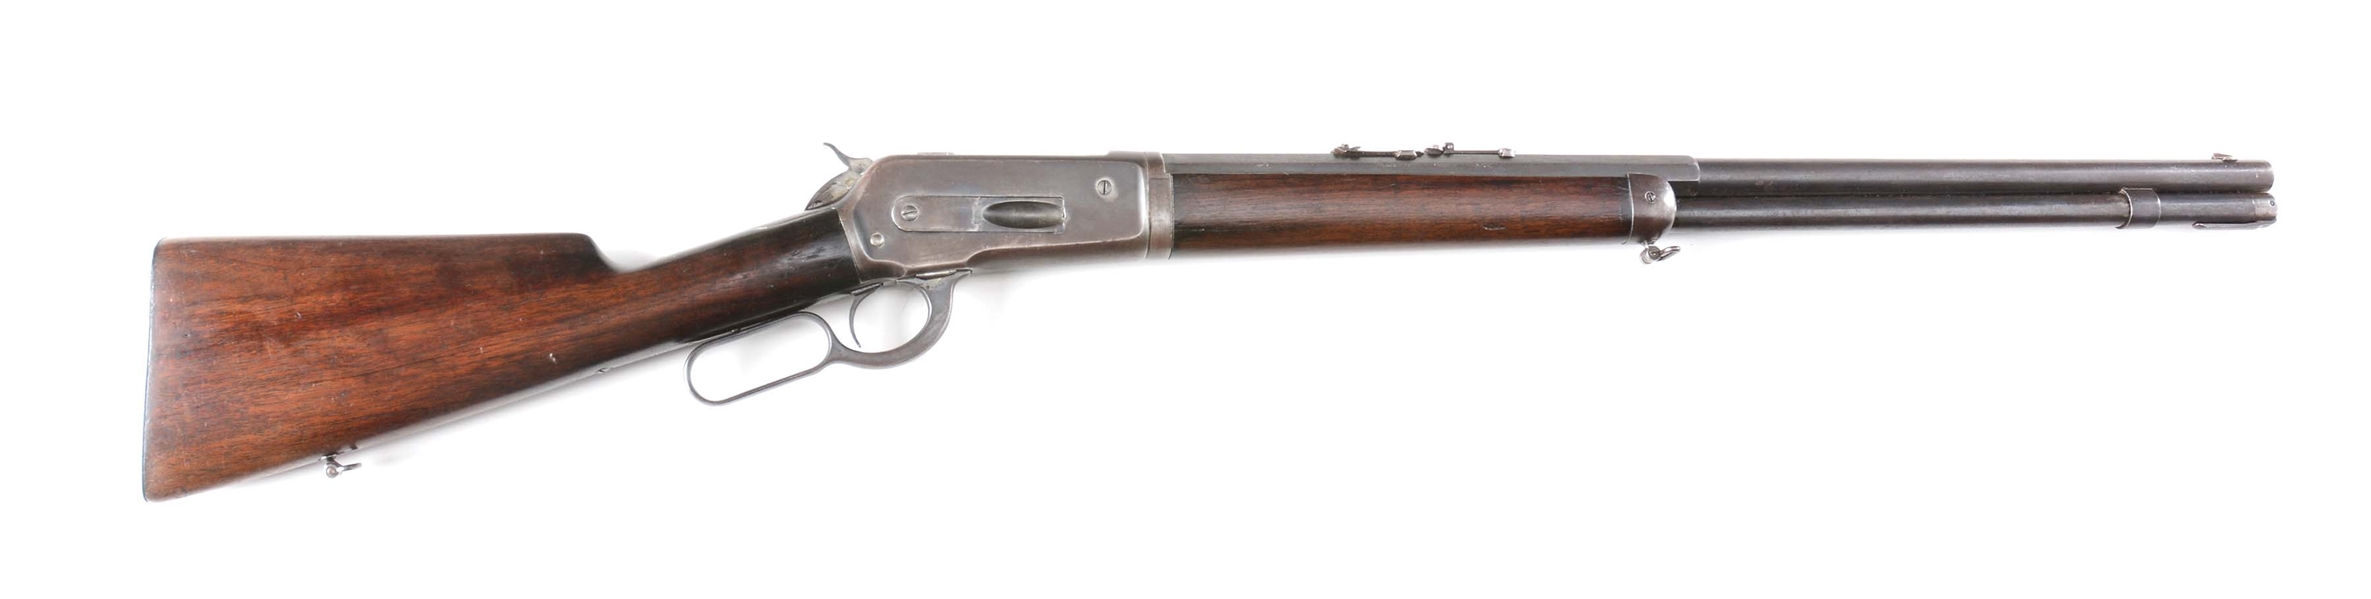 (C) SPECIAL ORDER WINCHESTER MODEL 1886 "BIG 50" TAKEDOWN LEVER ACTION RIFLE (1905).